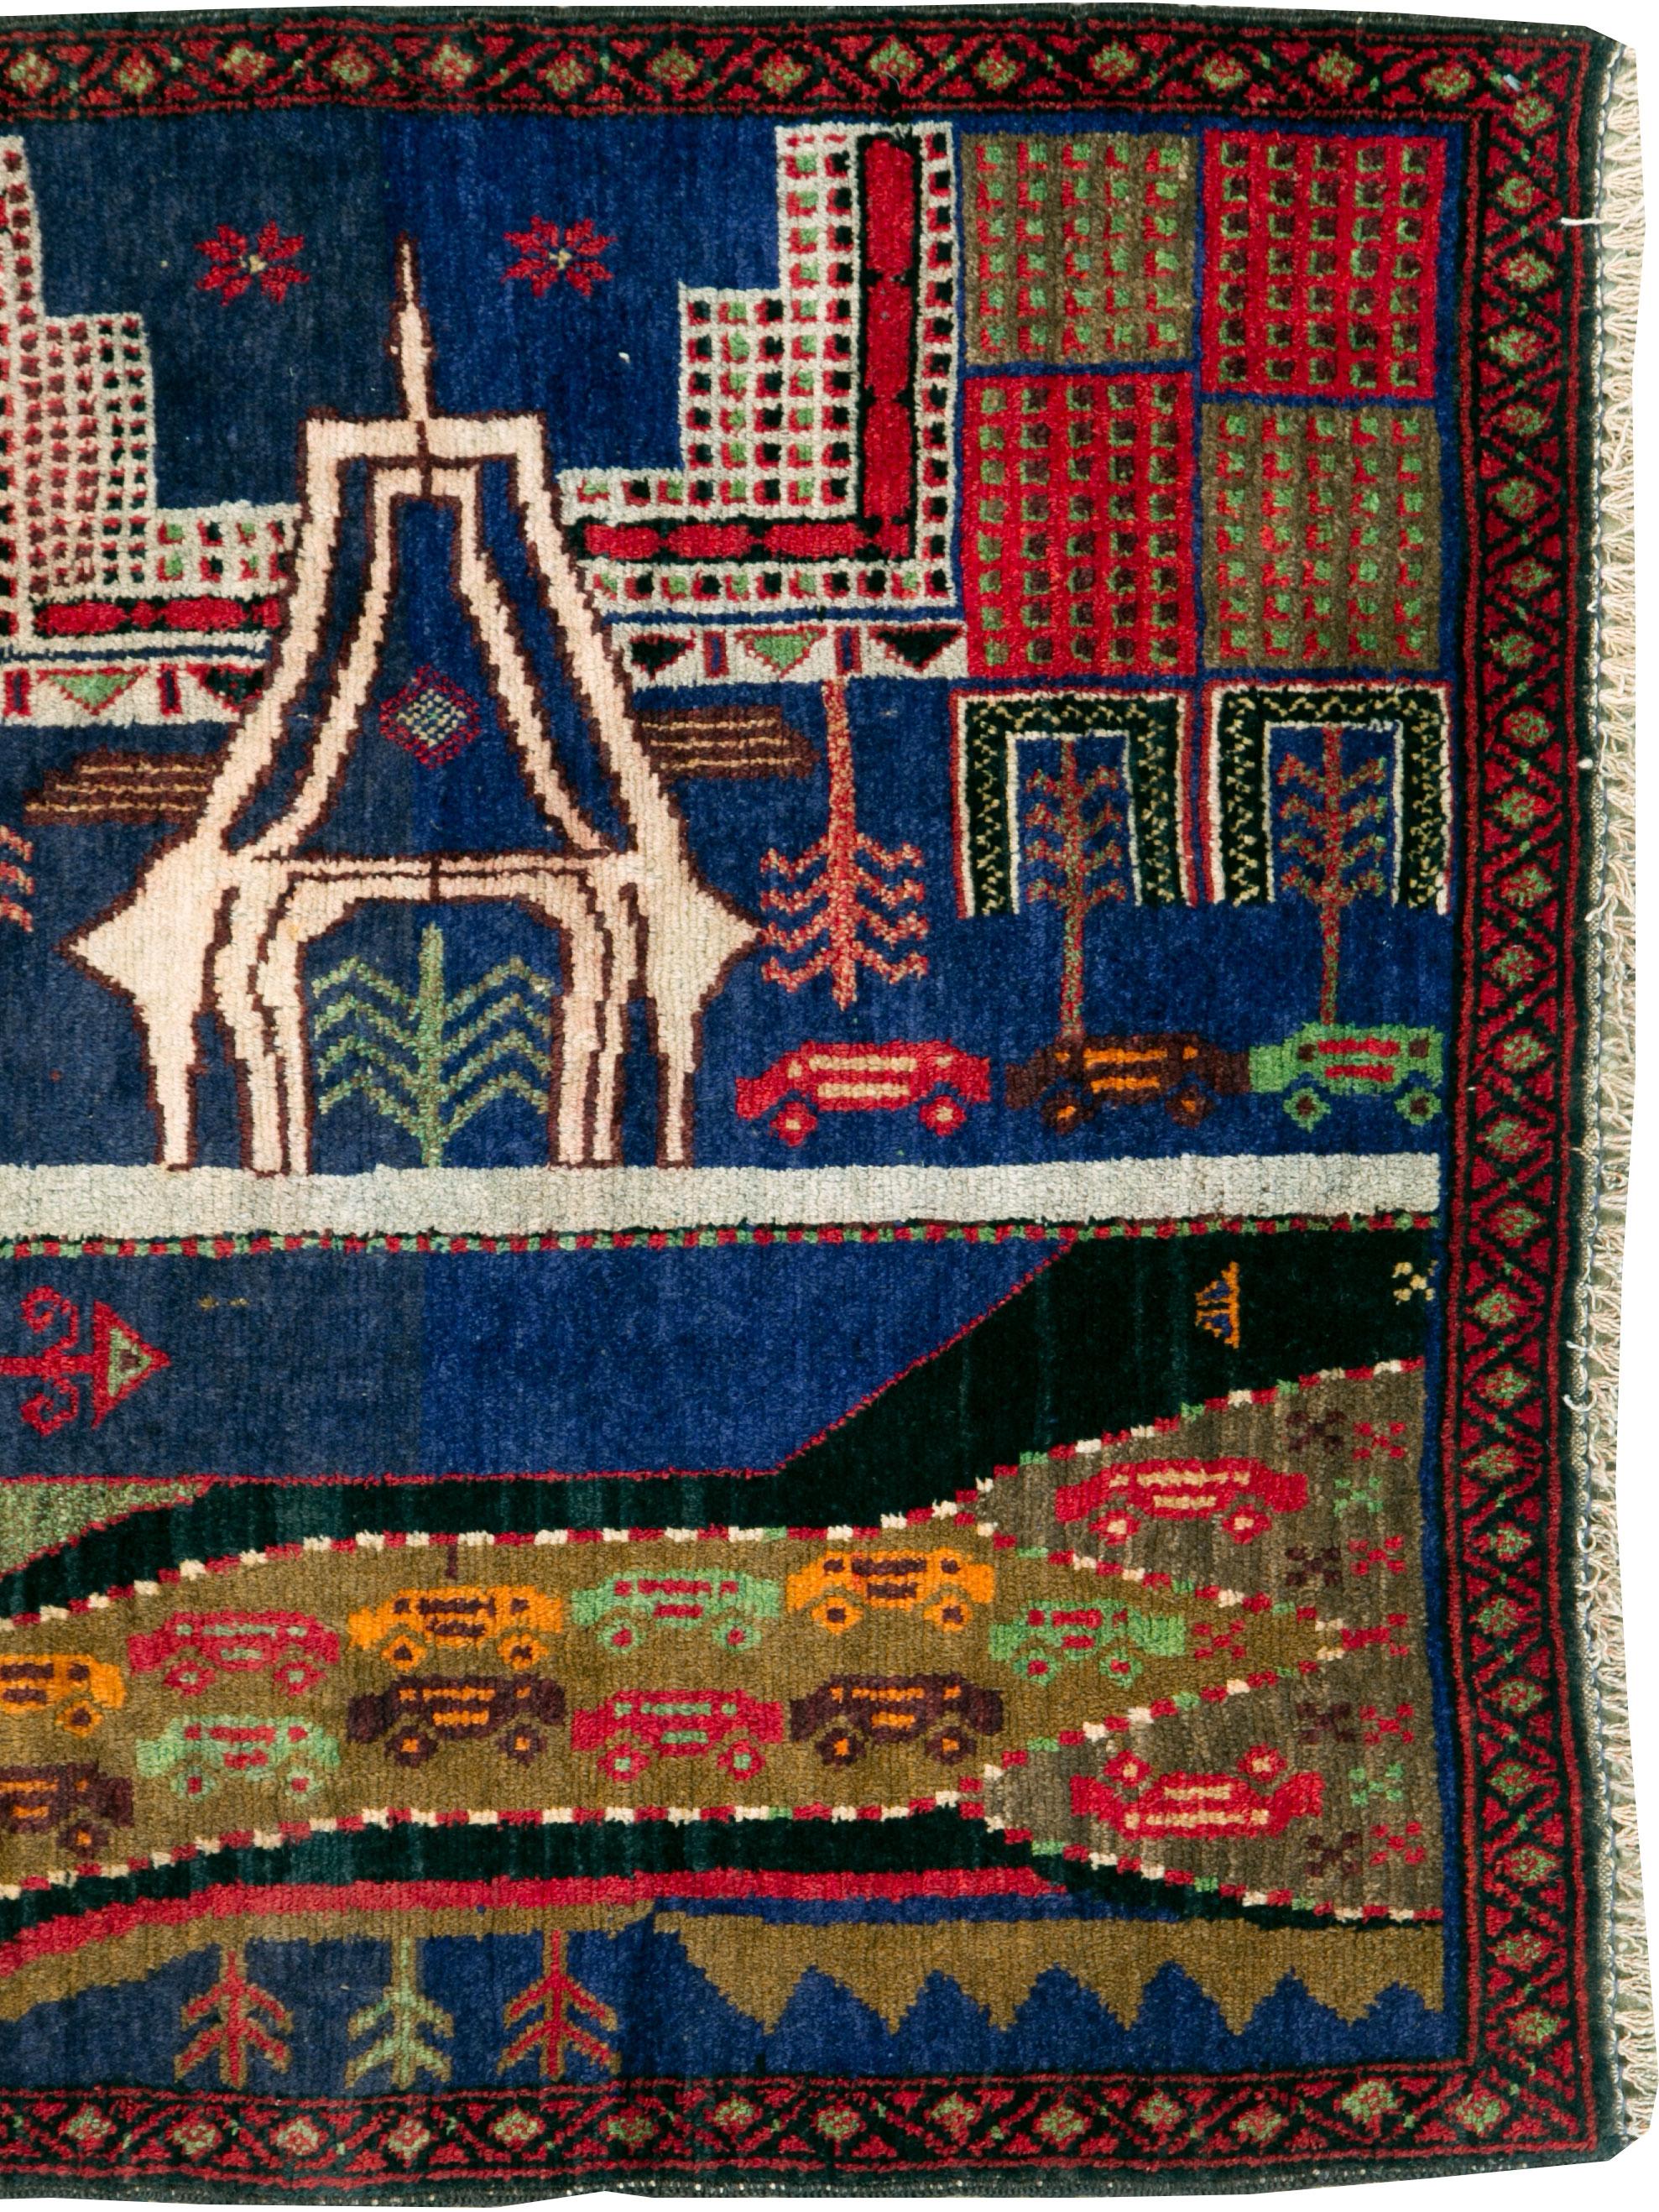 A vintage Afghan Pictorial Baluch rug from the mid-20th century.